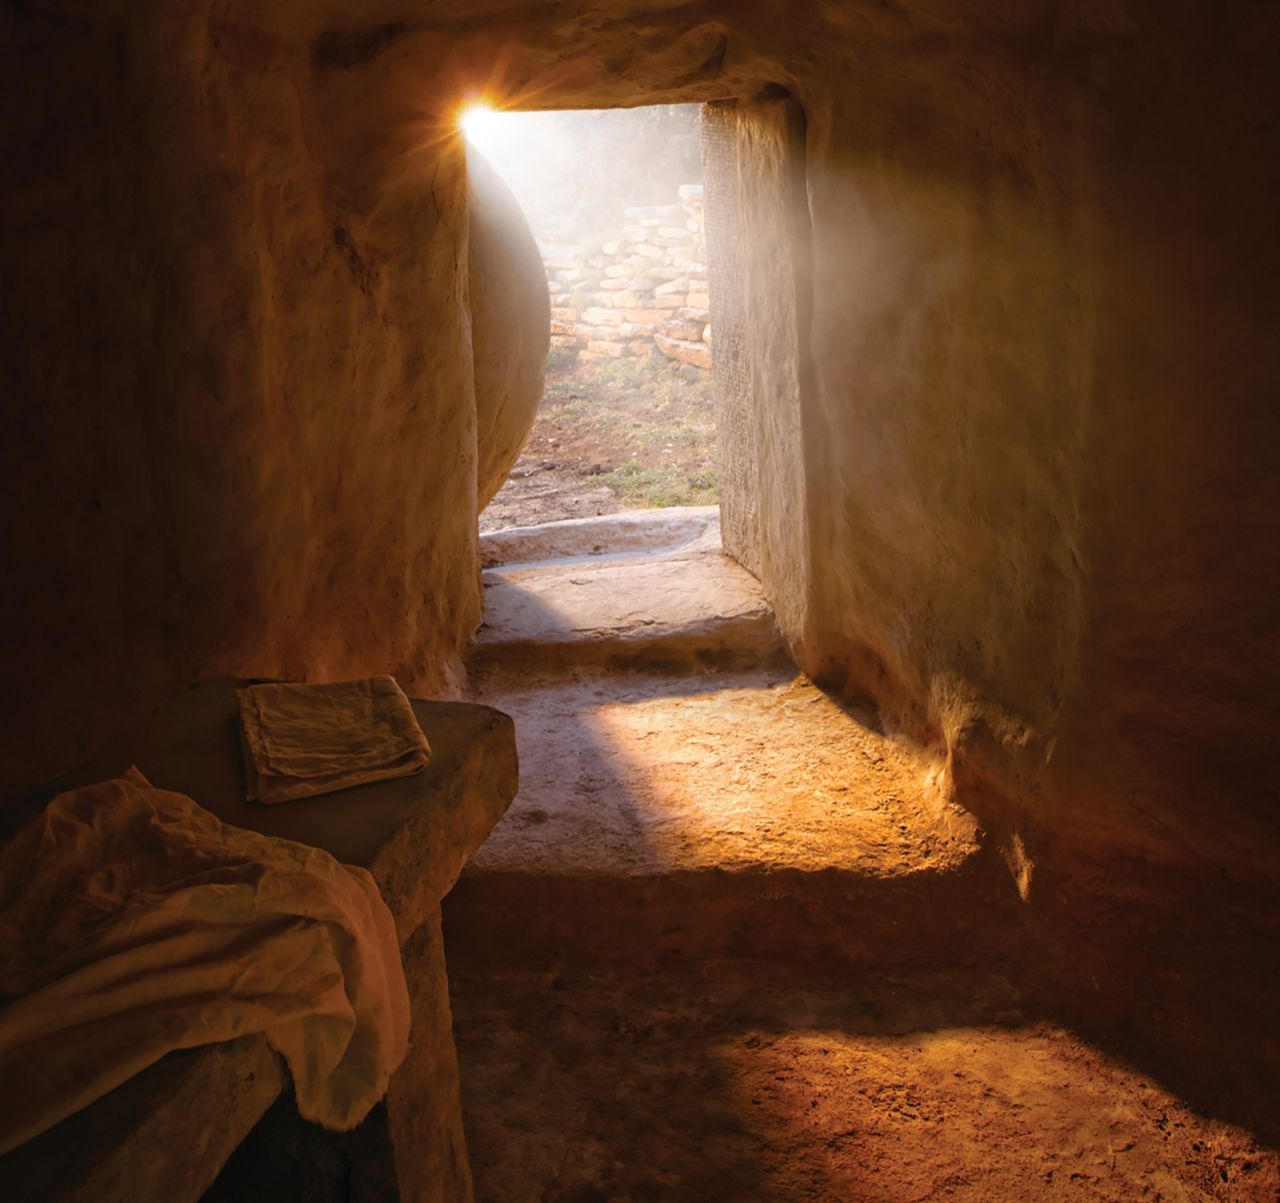 An image depicting the empty tomb of Jesus Christ on the morning of the resurrection